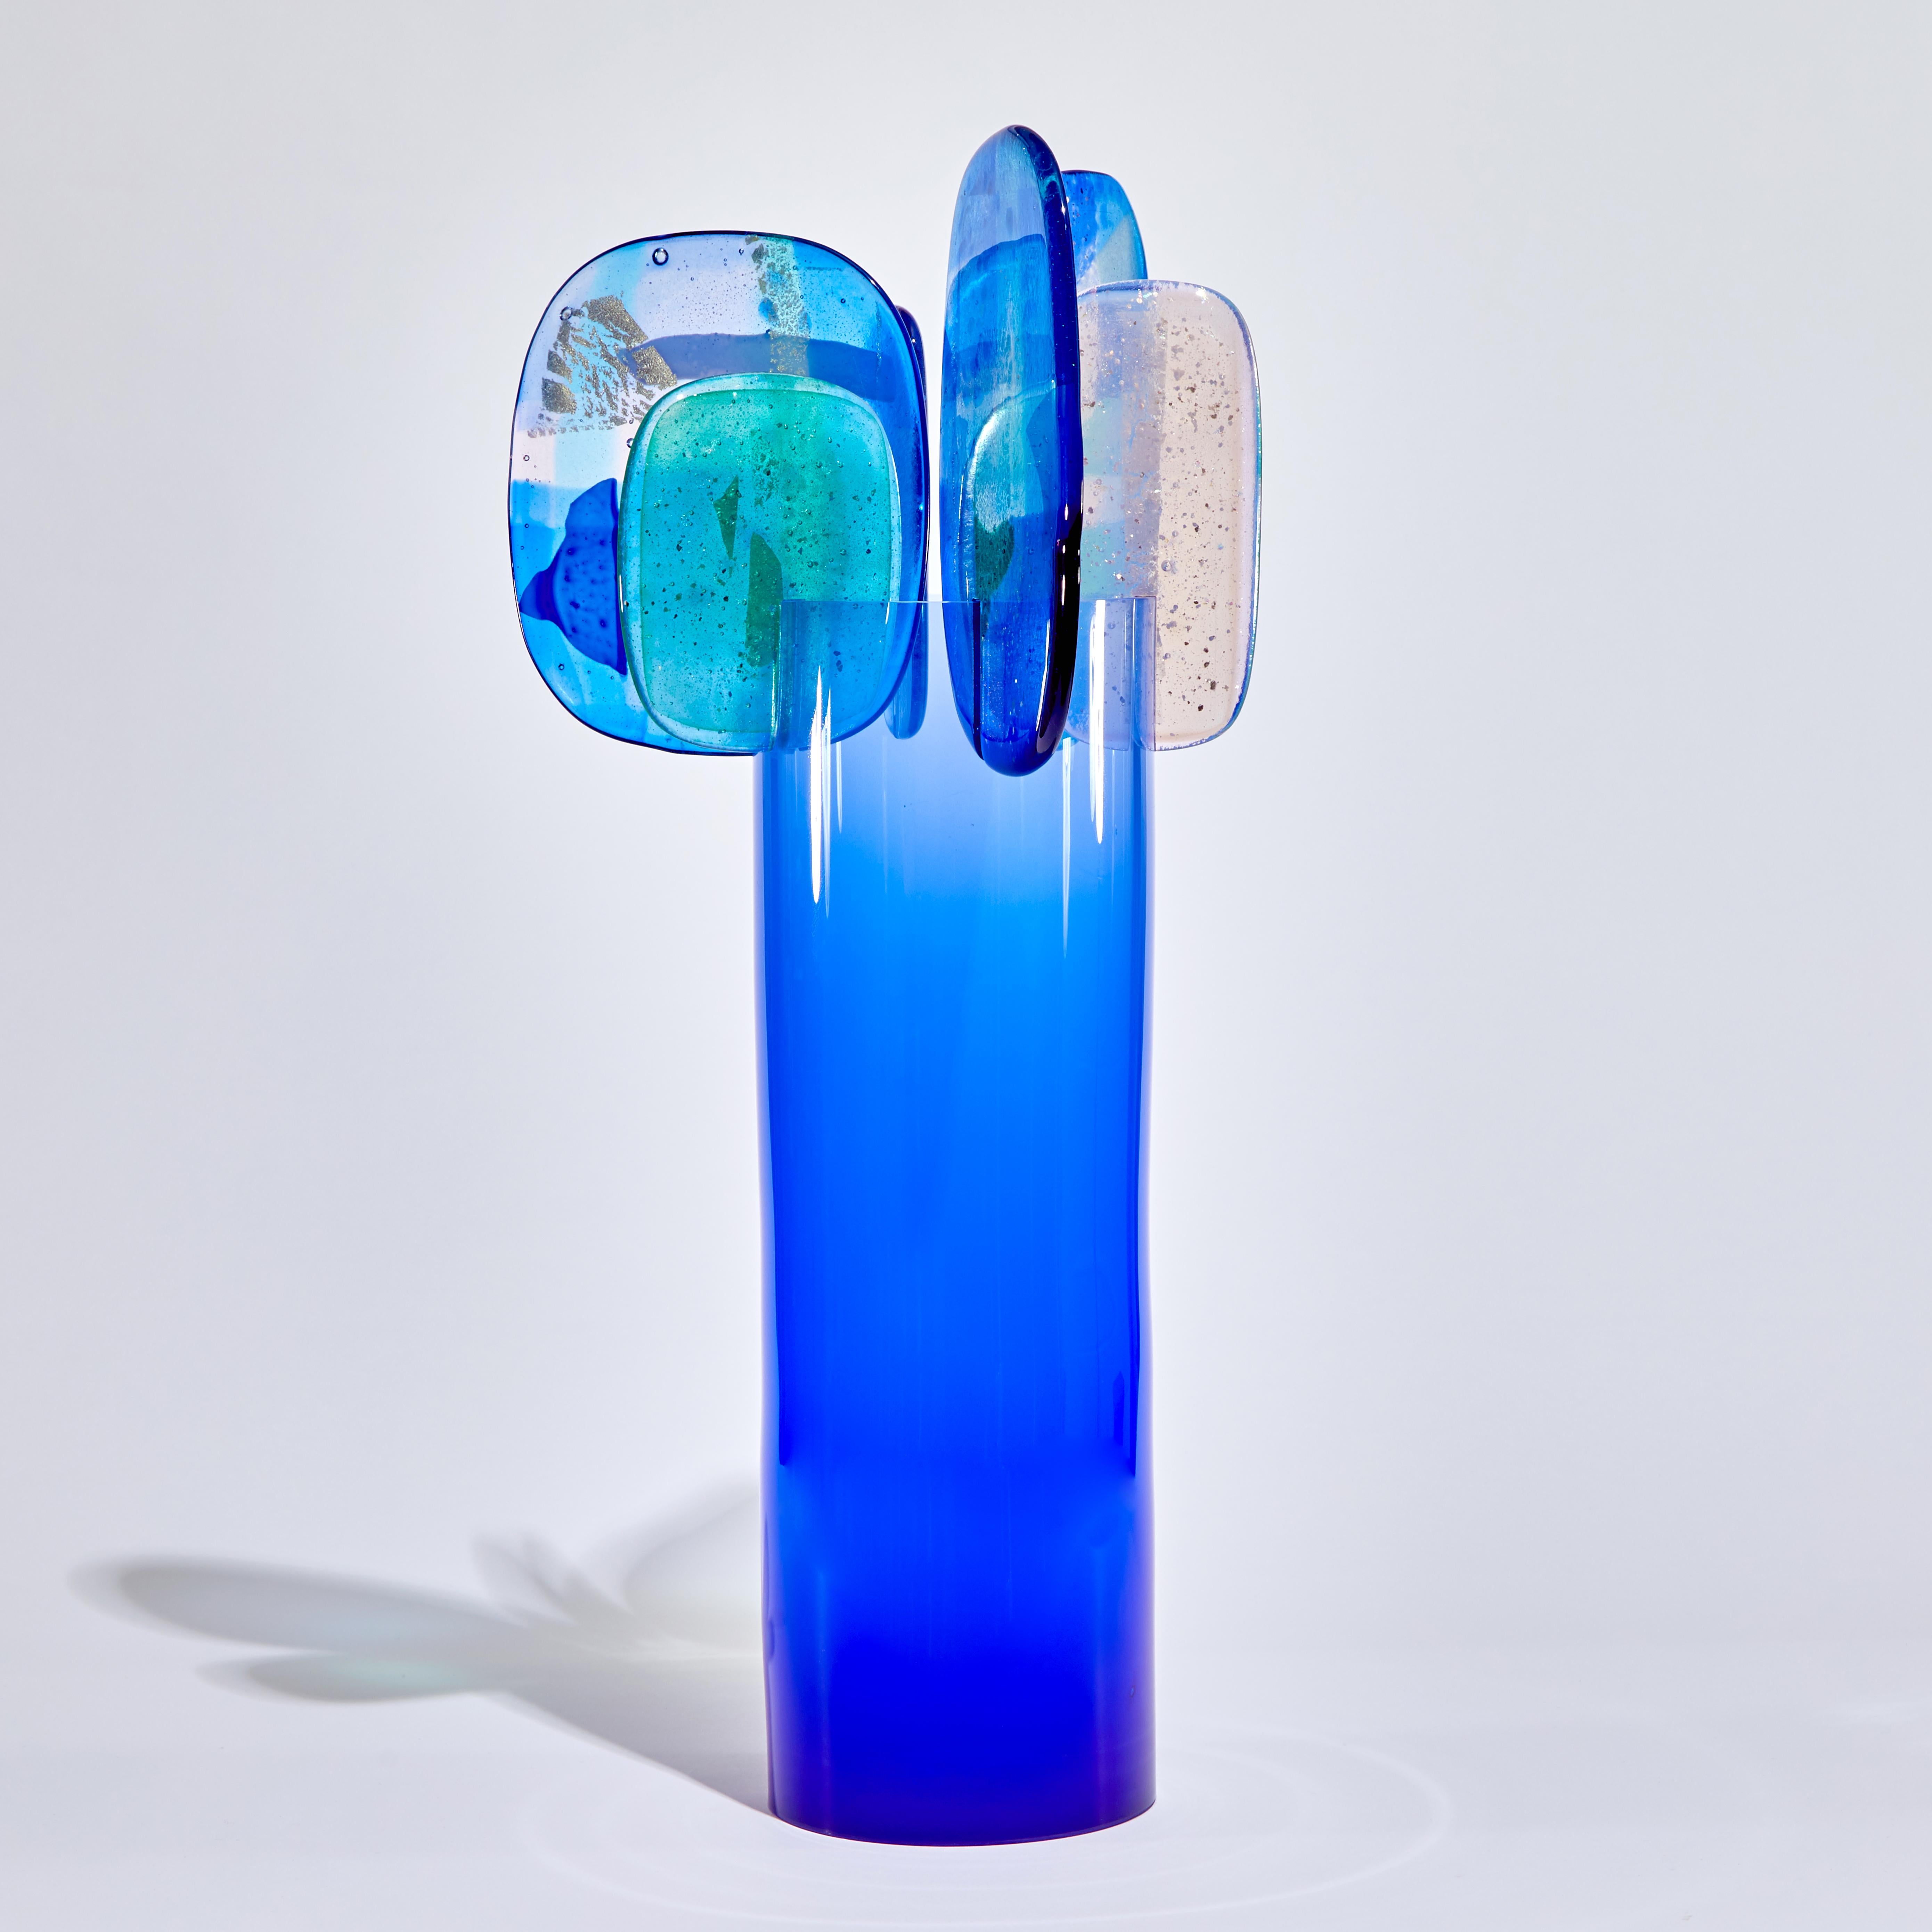 'Paradise 01 in Cobalt' is a unique glass sculpture created using hybrid hand-made glass techniques by the British artist Amy Cushing. Combining mouth blown glass with kiln formed glass, each piece within the collection displays a multiple of highly